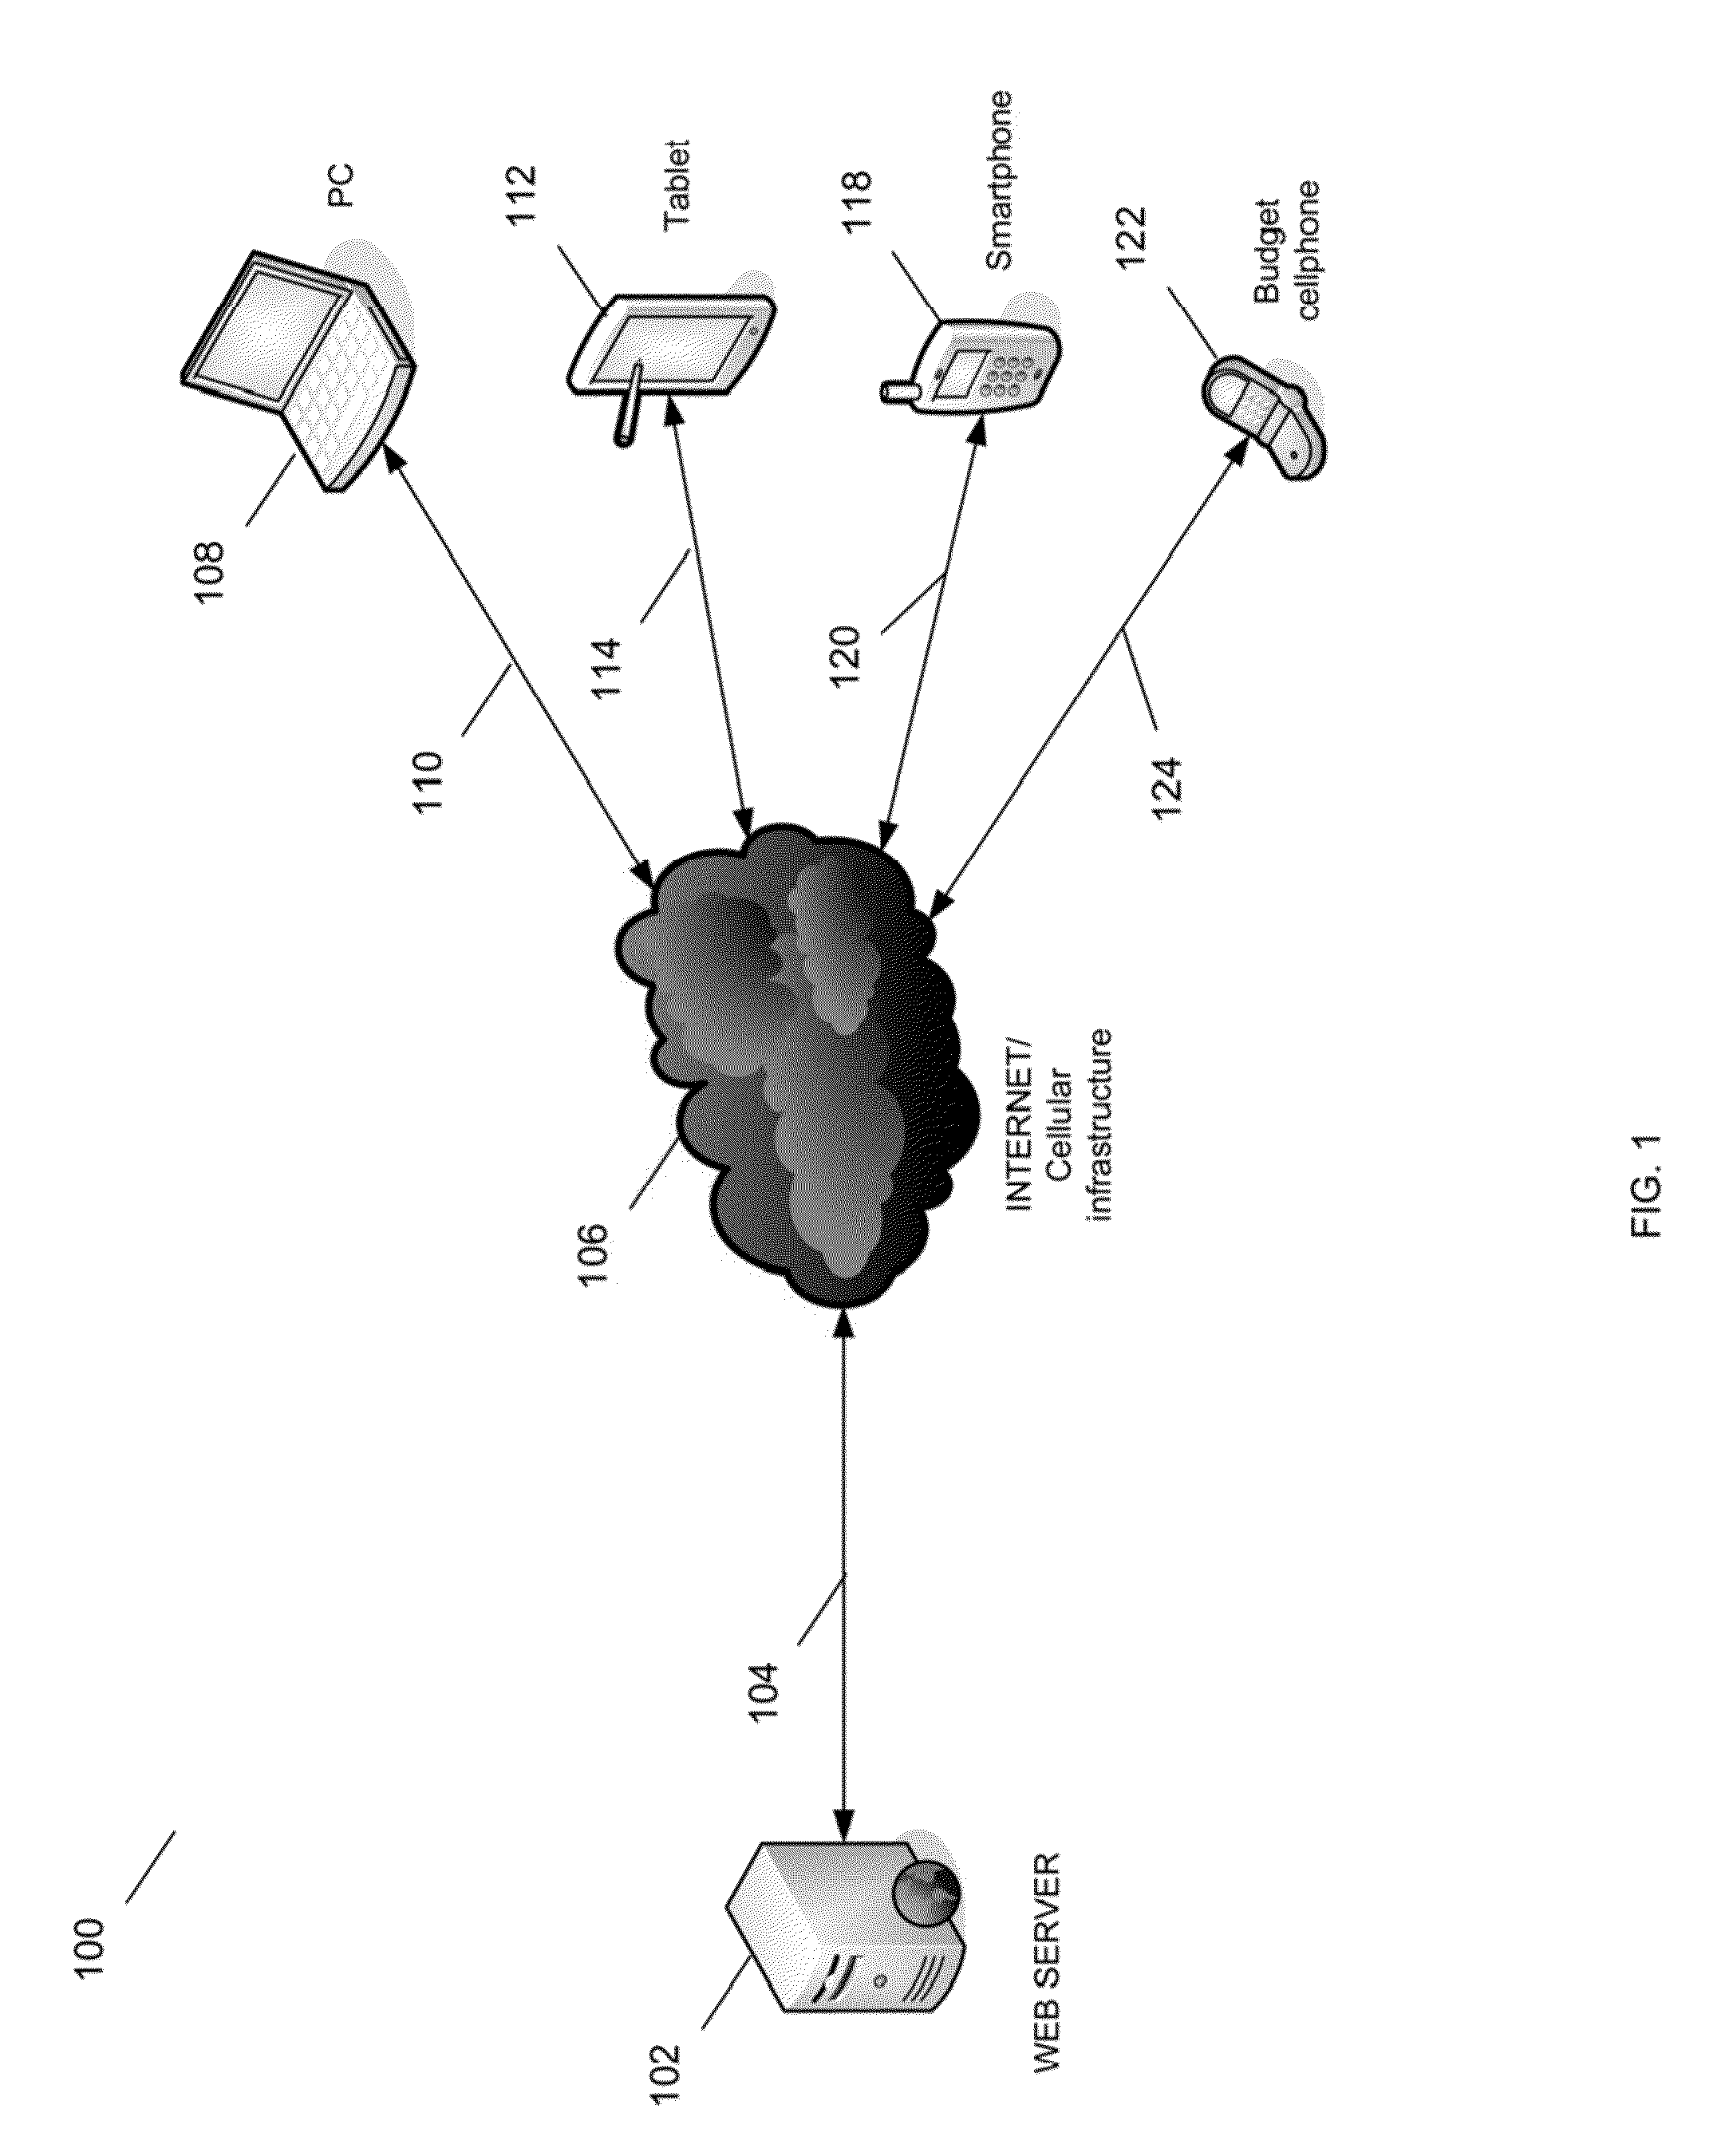 System and method for logical chunking and restructuring websites